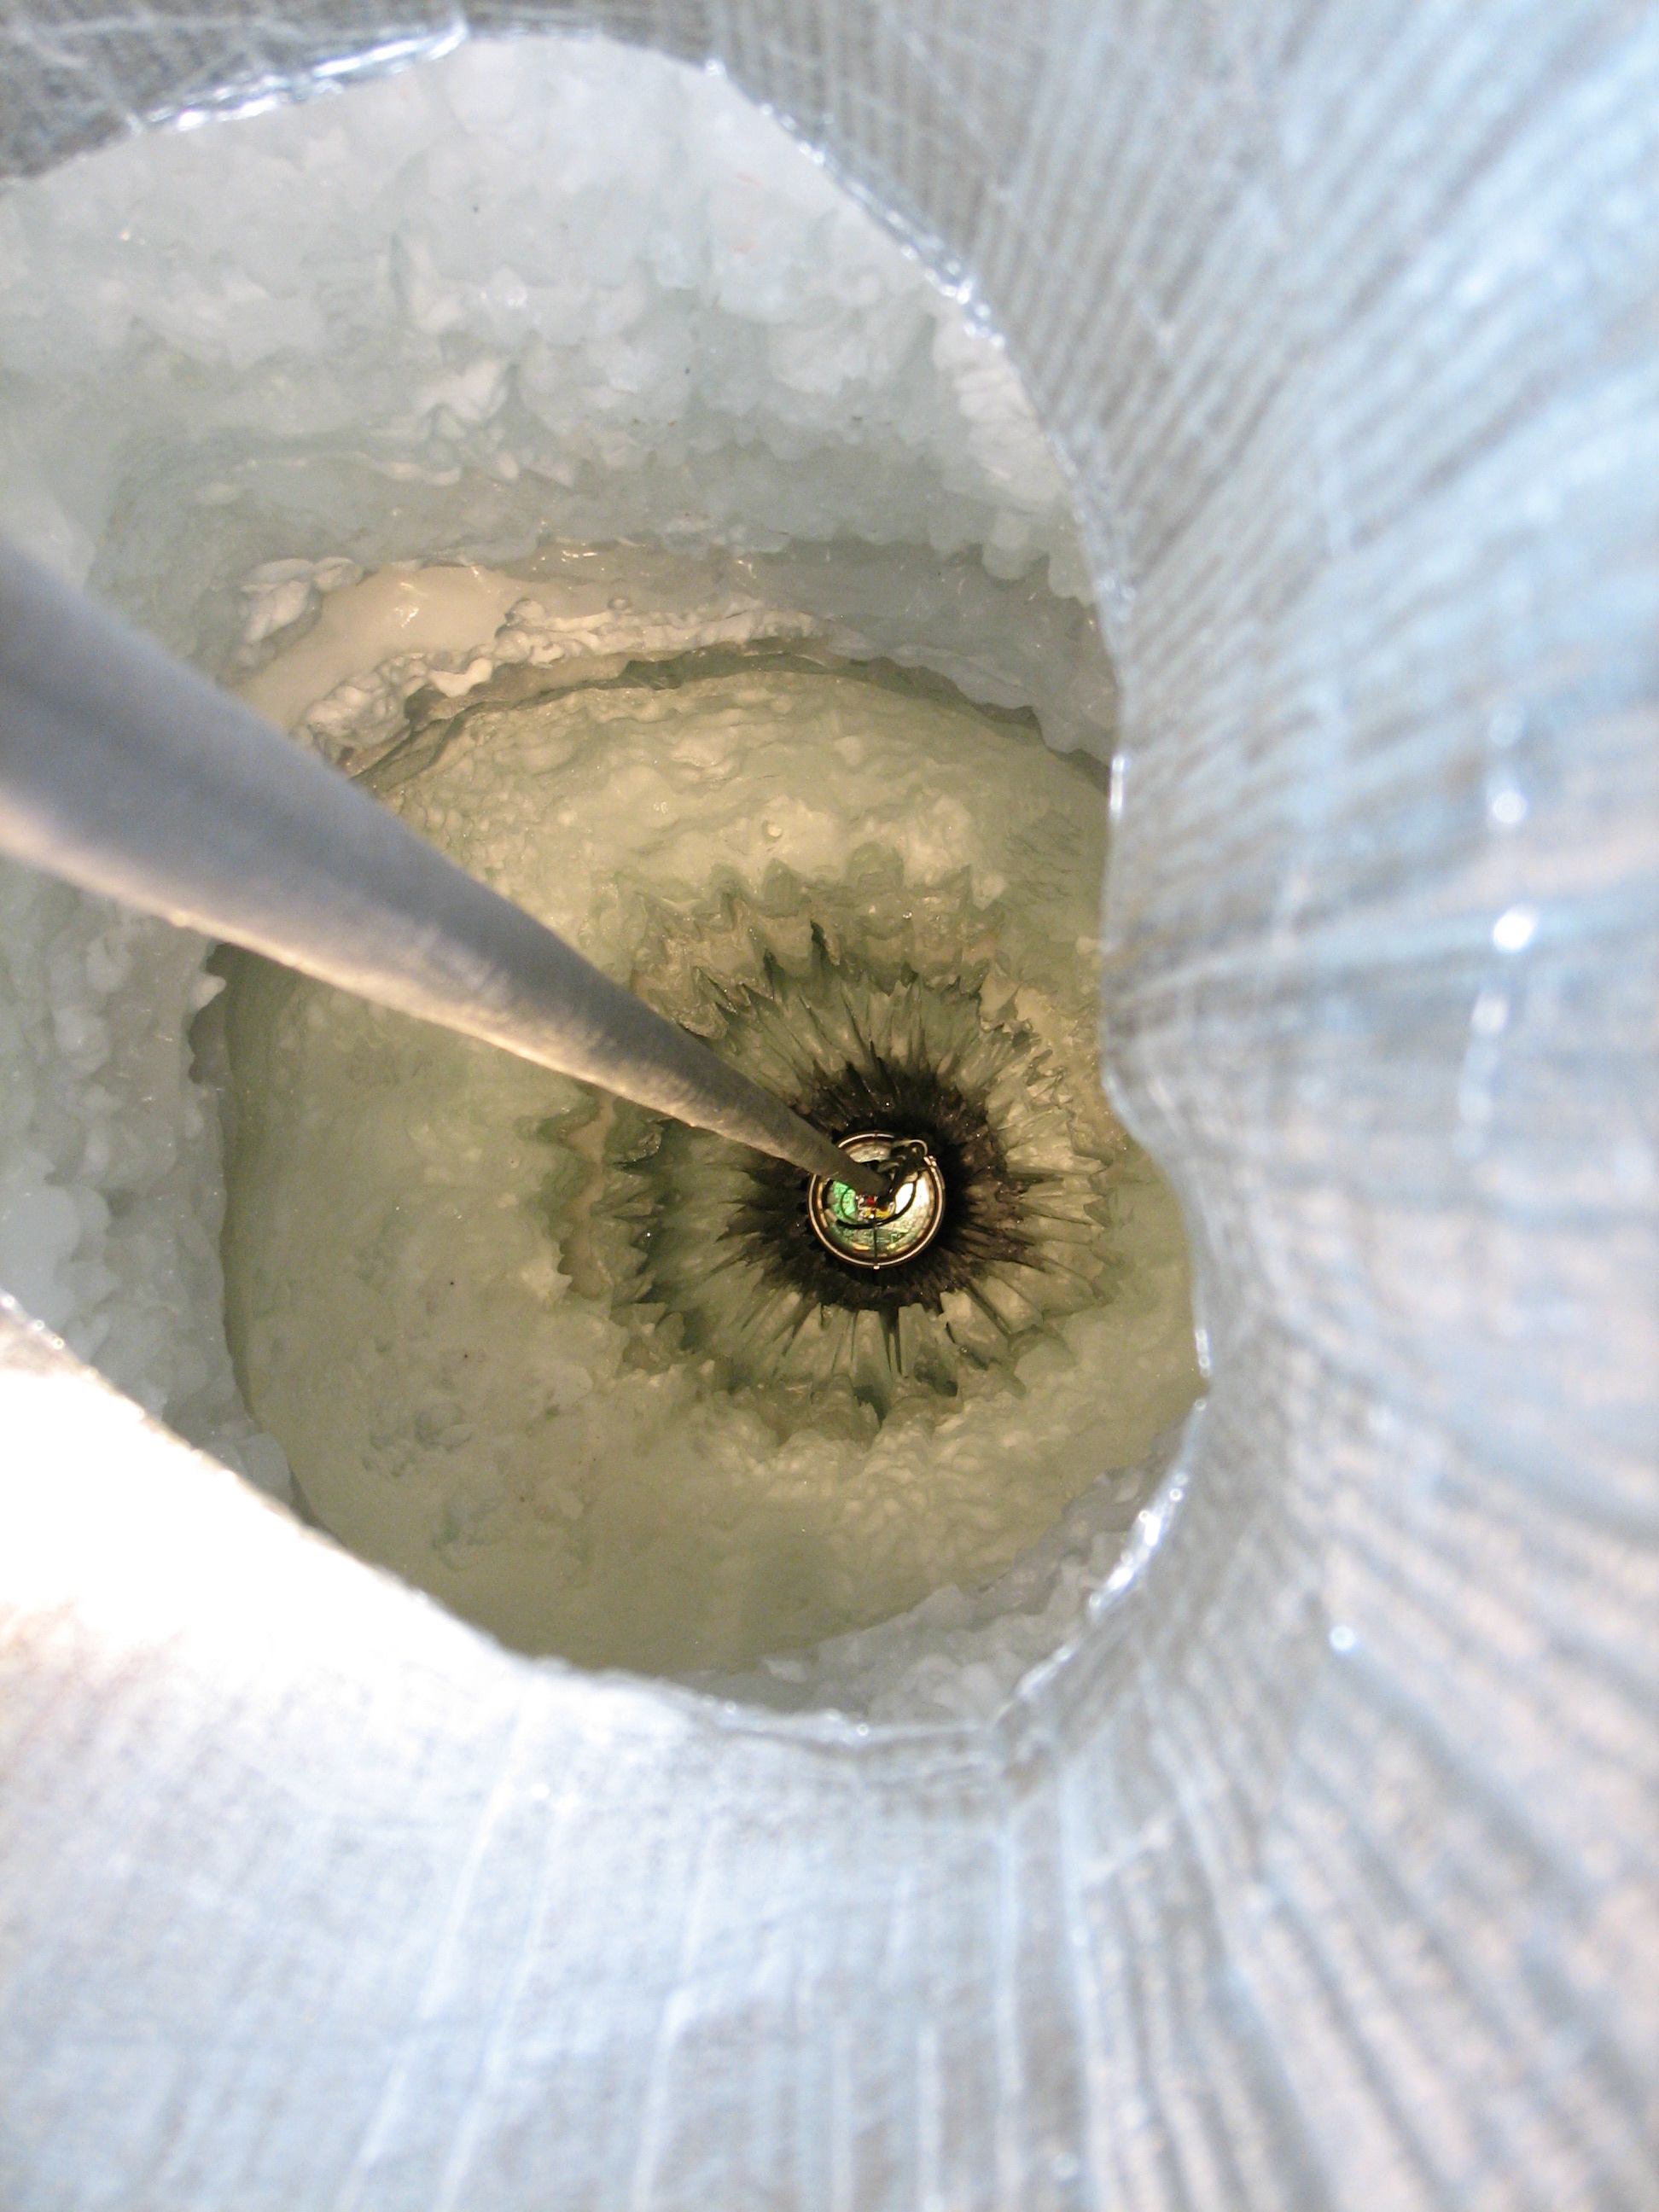 A DOM lowered into the hole of an IceCube string